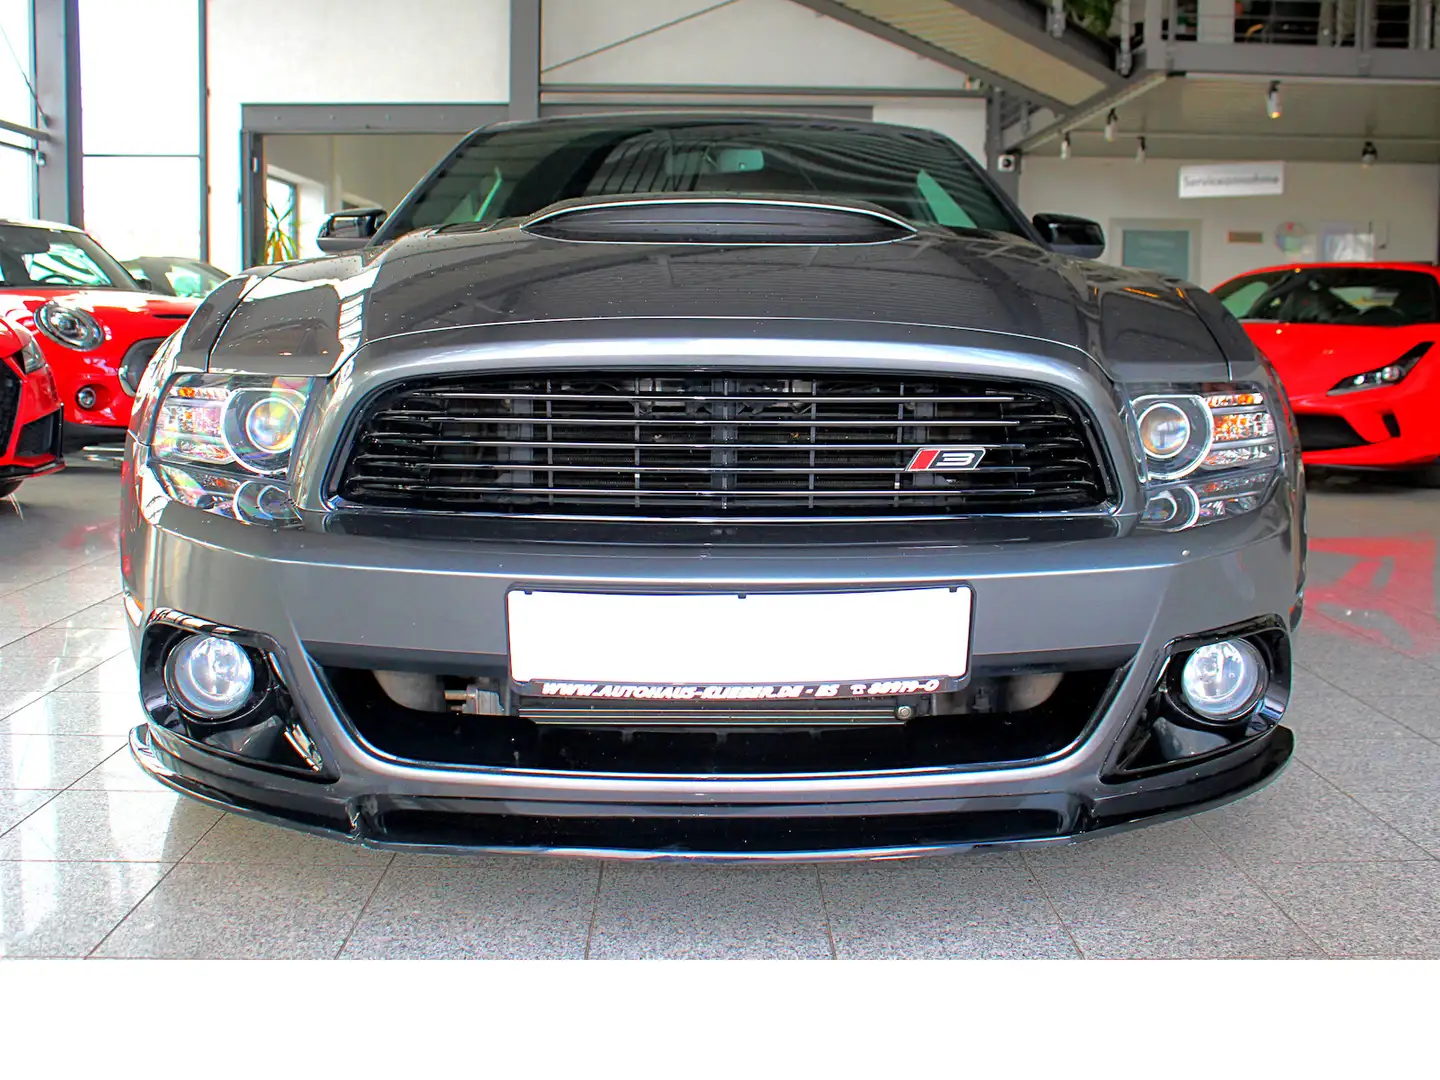 Ford Mustang V8 5.0 GT Roush Stage 3 Supercharger Grau - 2